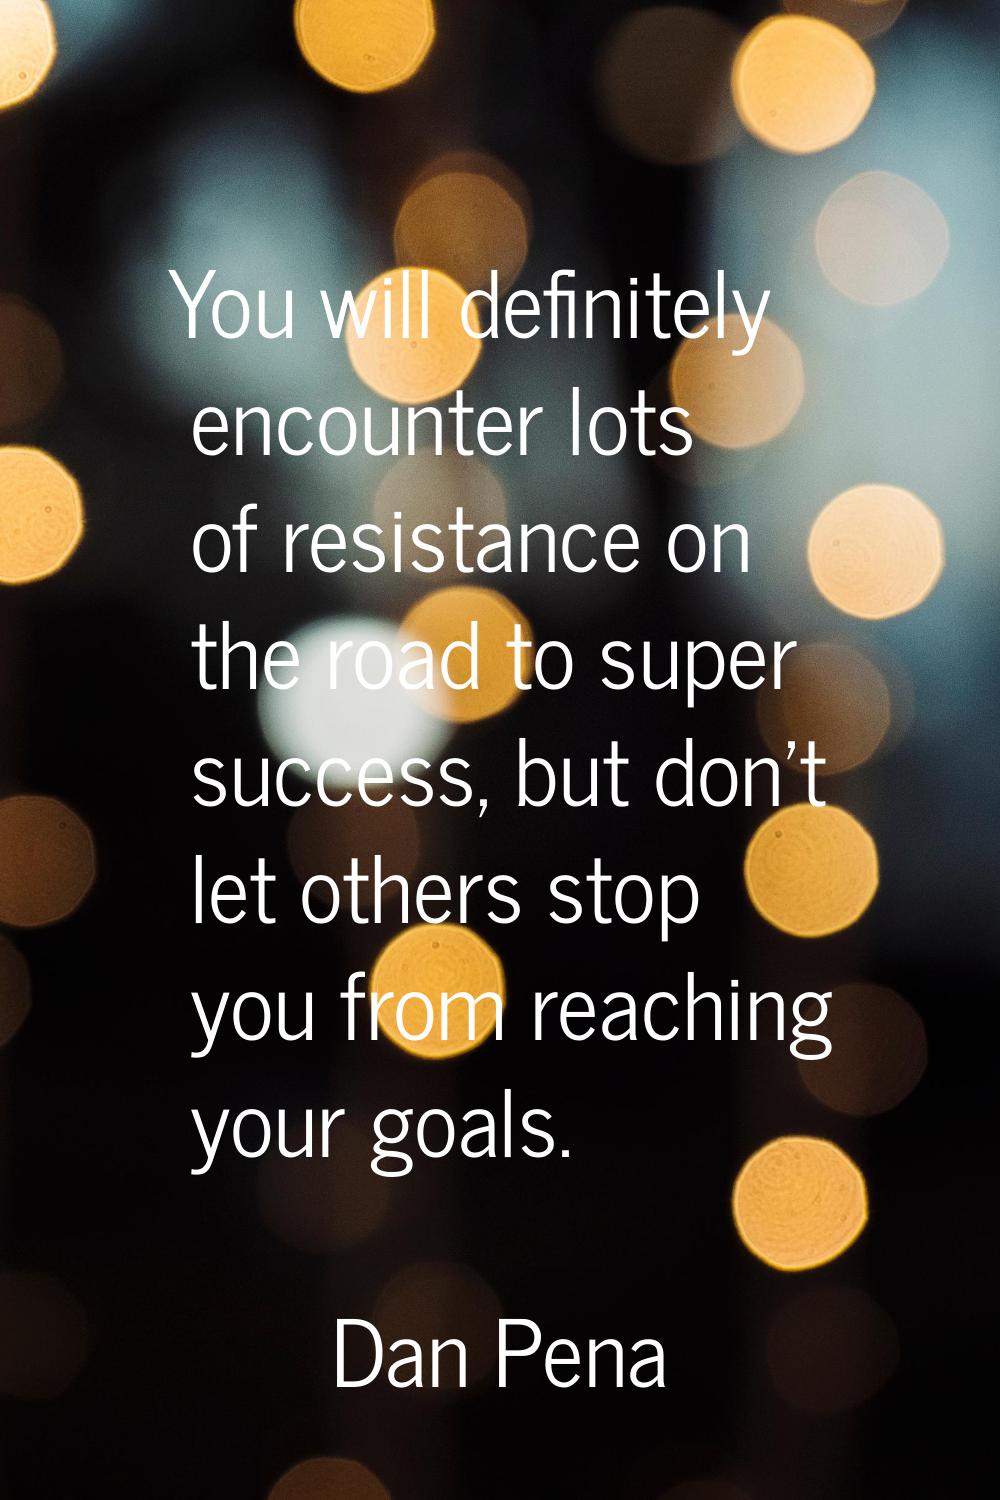 You will definitely encounter lots of resistance on the road to super success, but don't let others